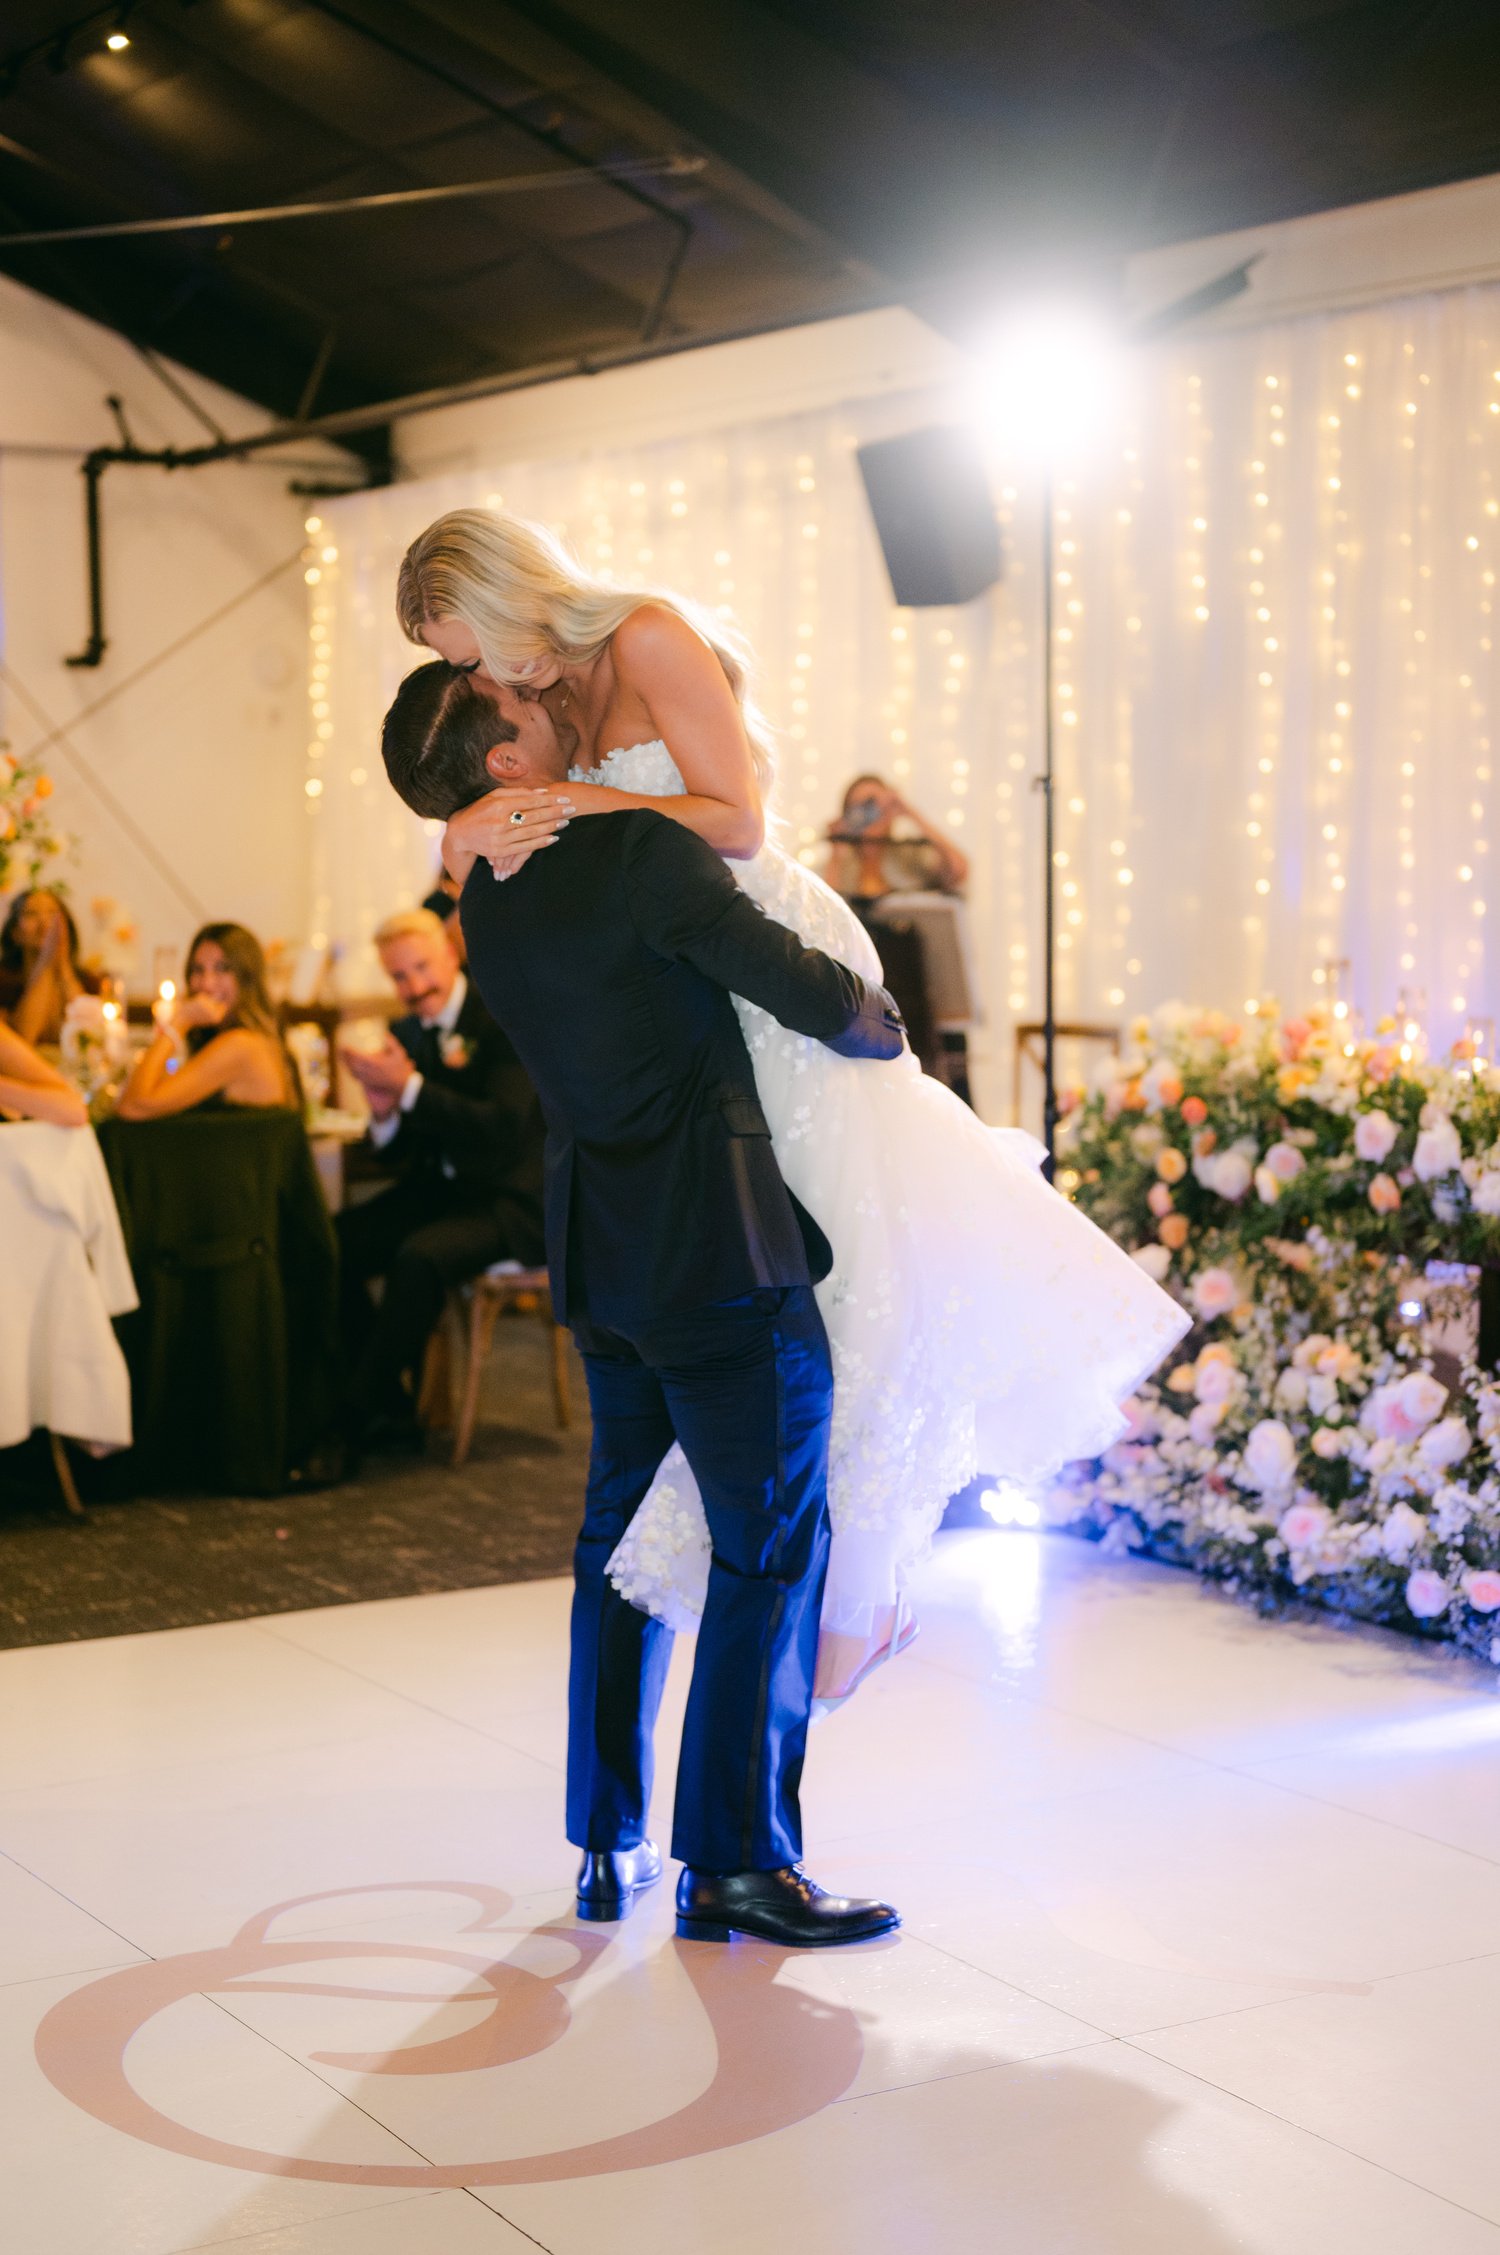 Elm Estate Wedding photos, photo of the groom carrying the bride during their first dance